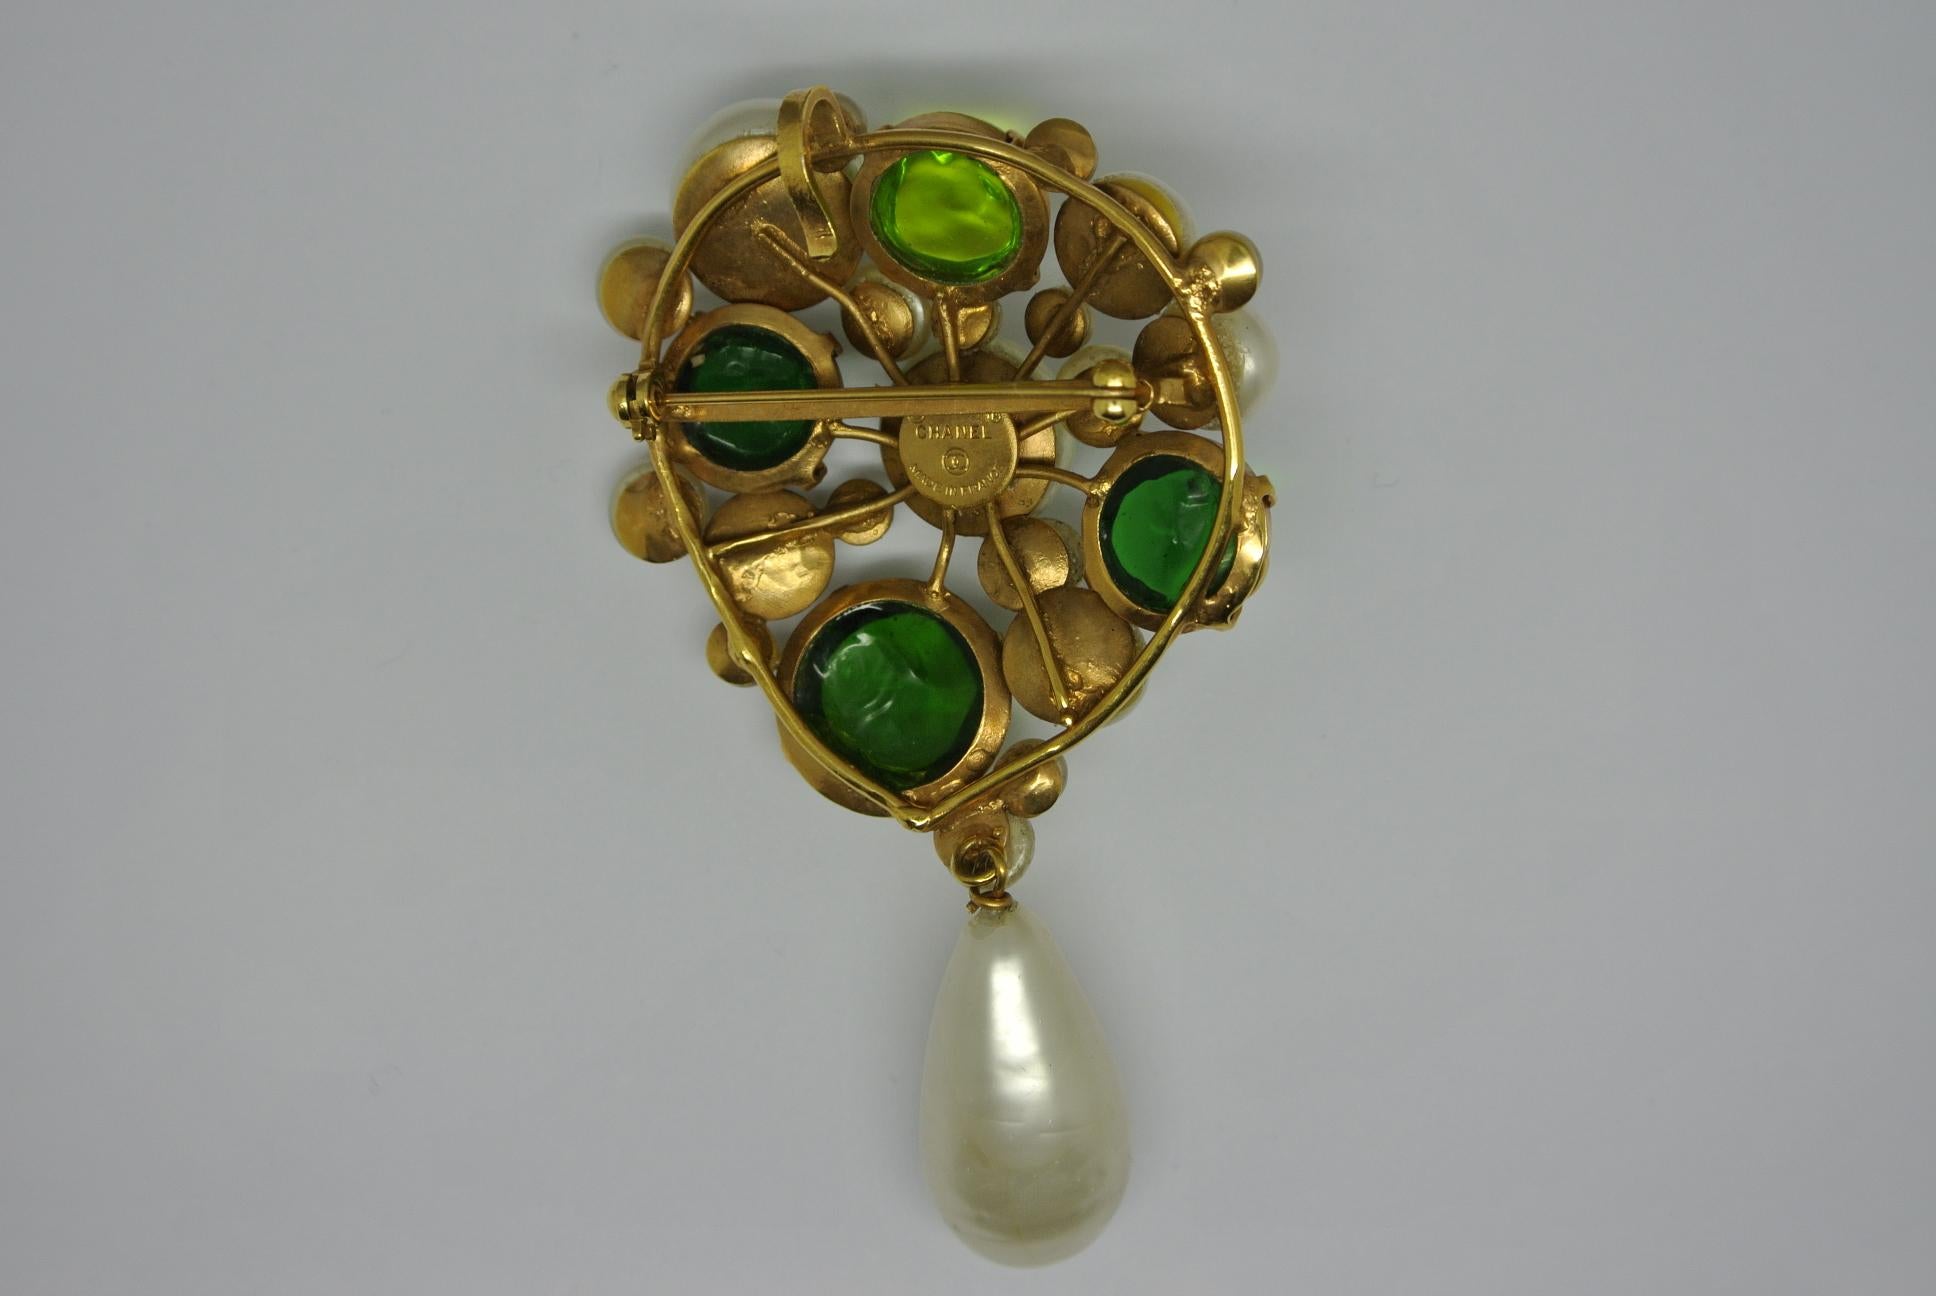 Vintage Chanel Green Gripoix Poured Glass Faux Pearl Drop Brooch Pendant In Excellent Condition For Sale In London, GB